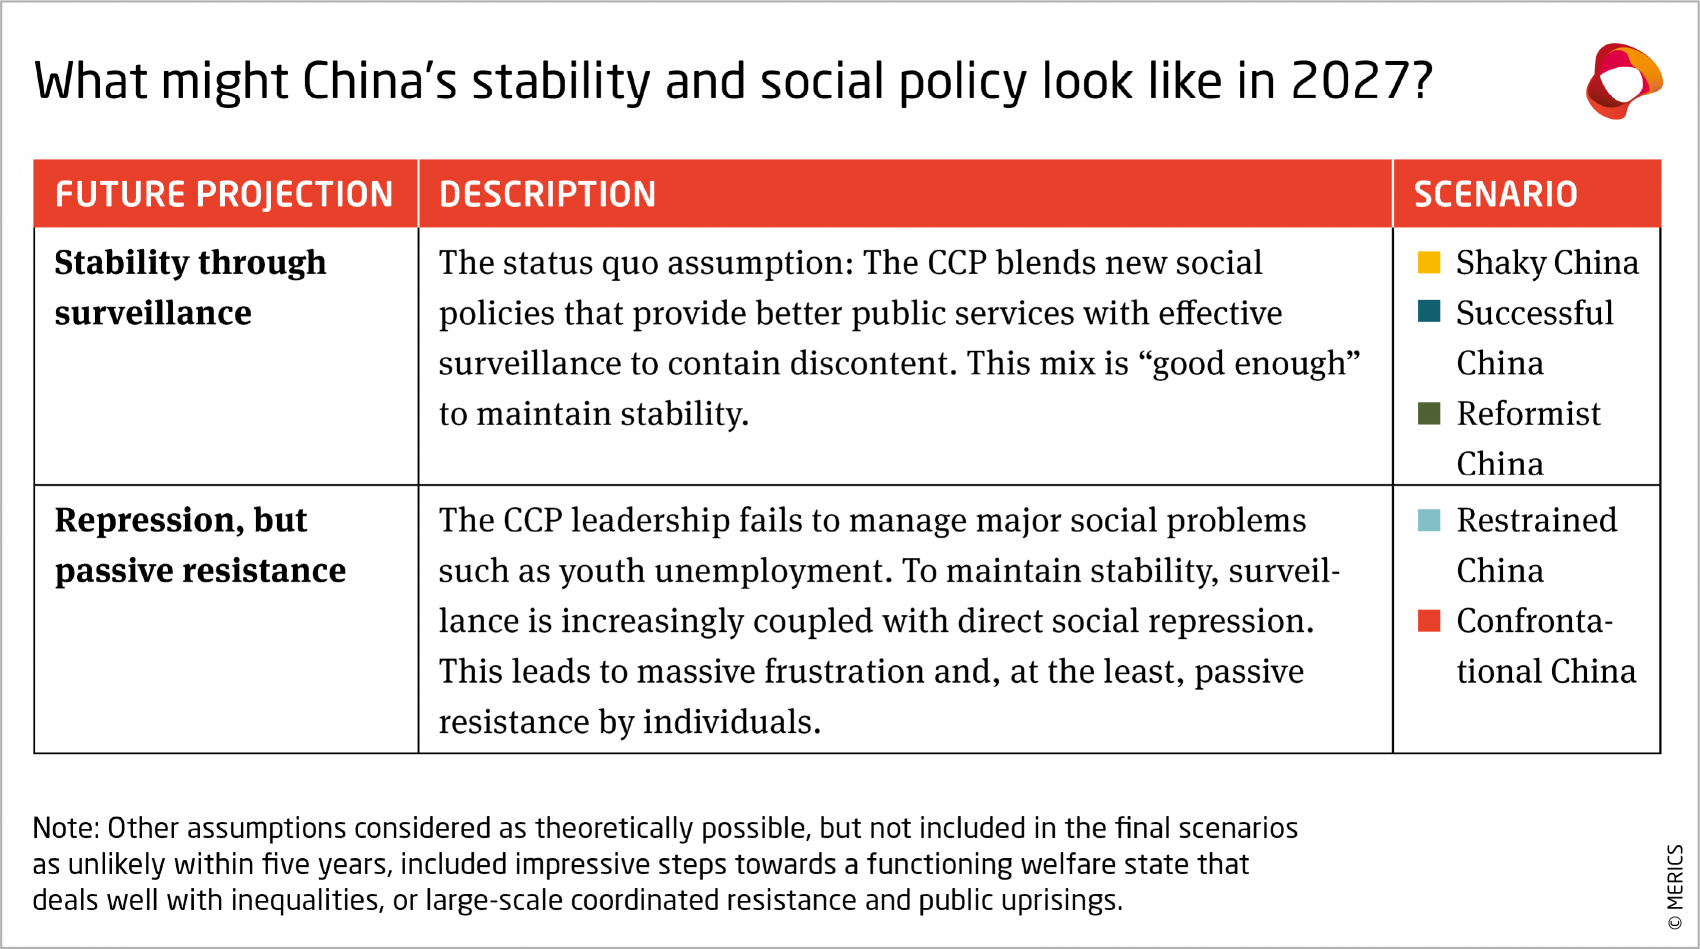 Chinas stability and social policy in 2027